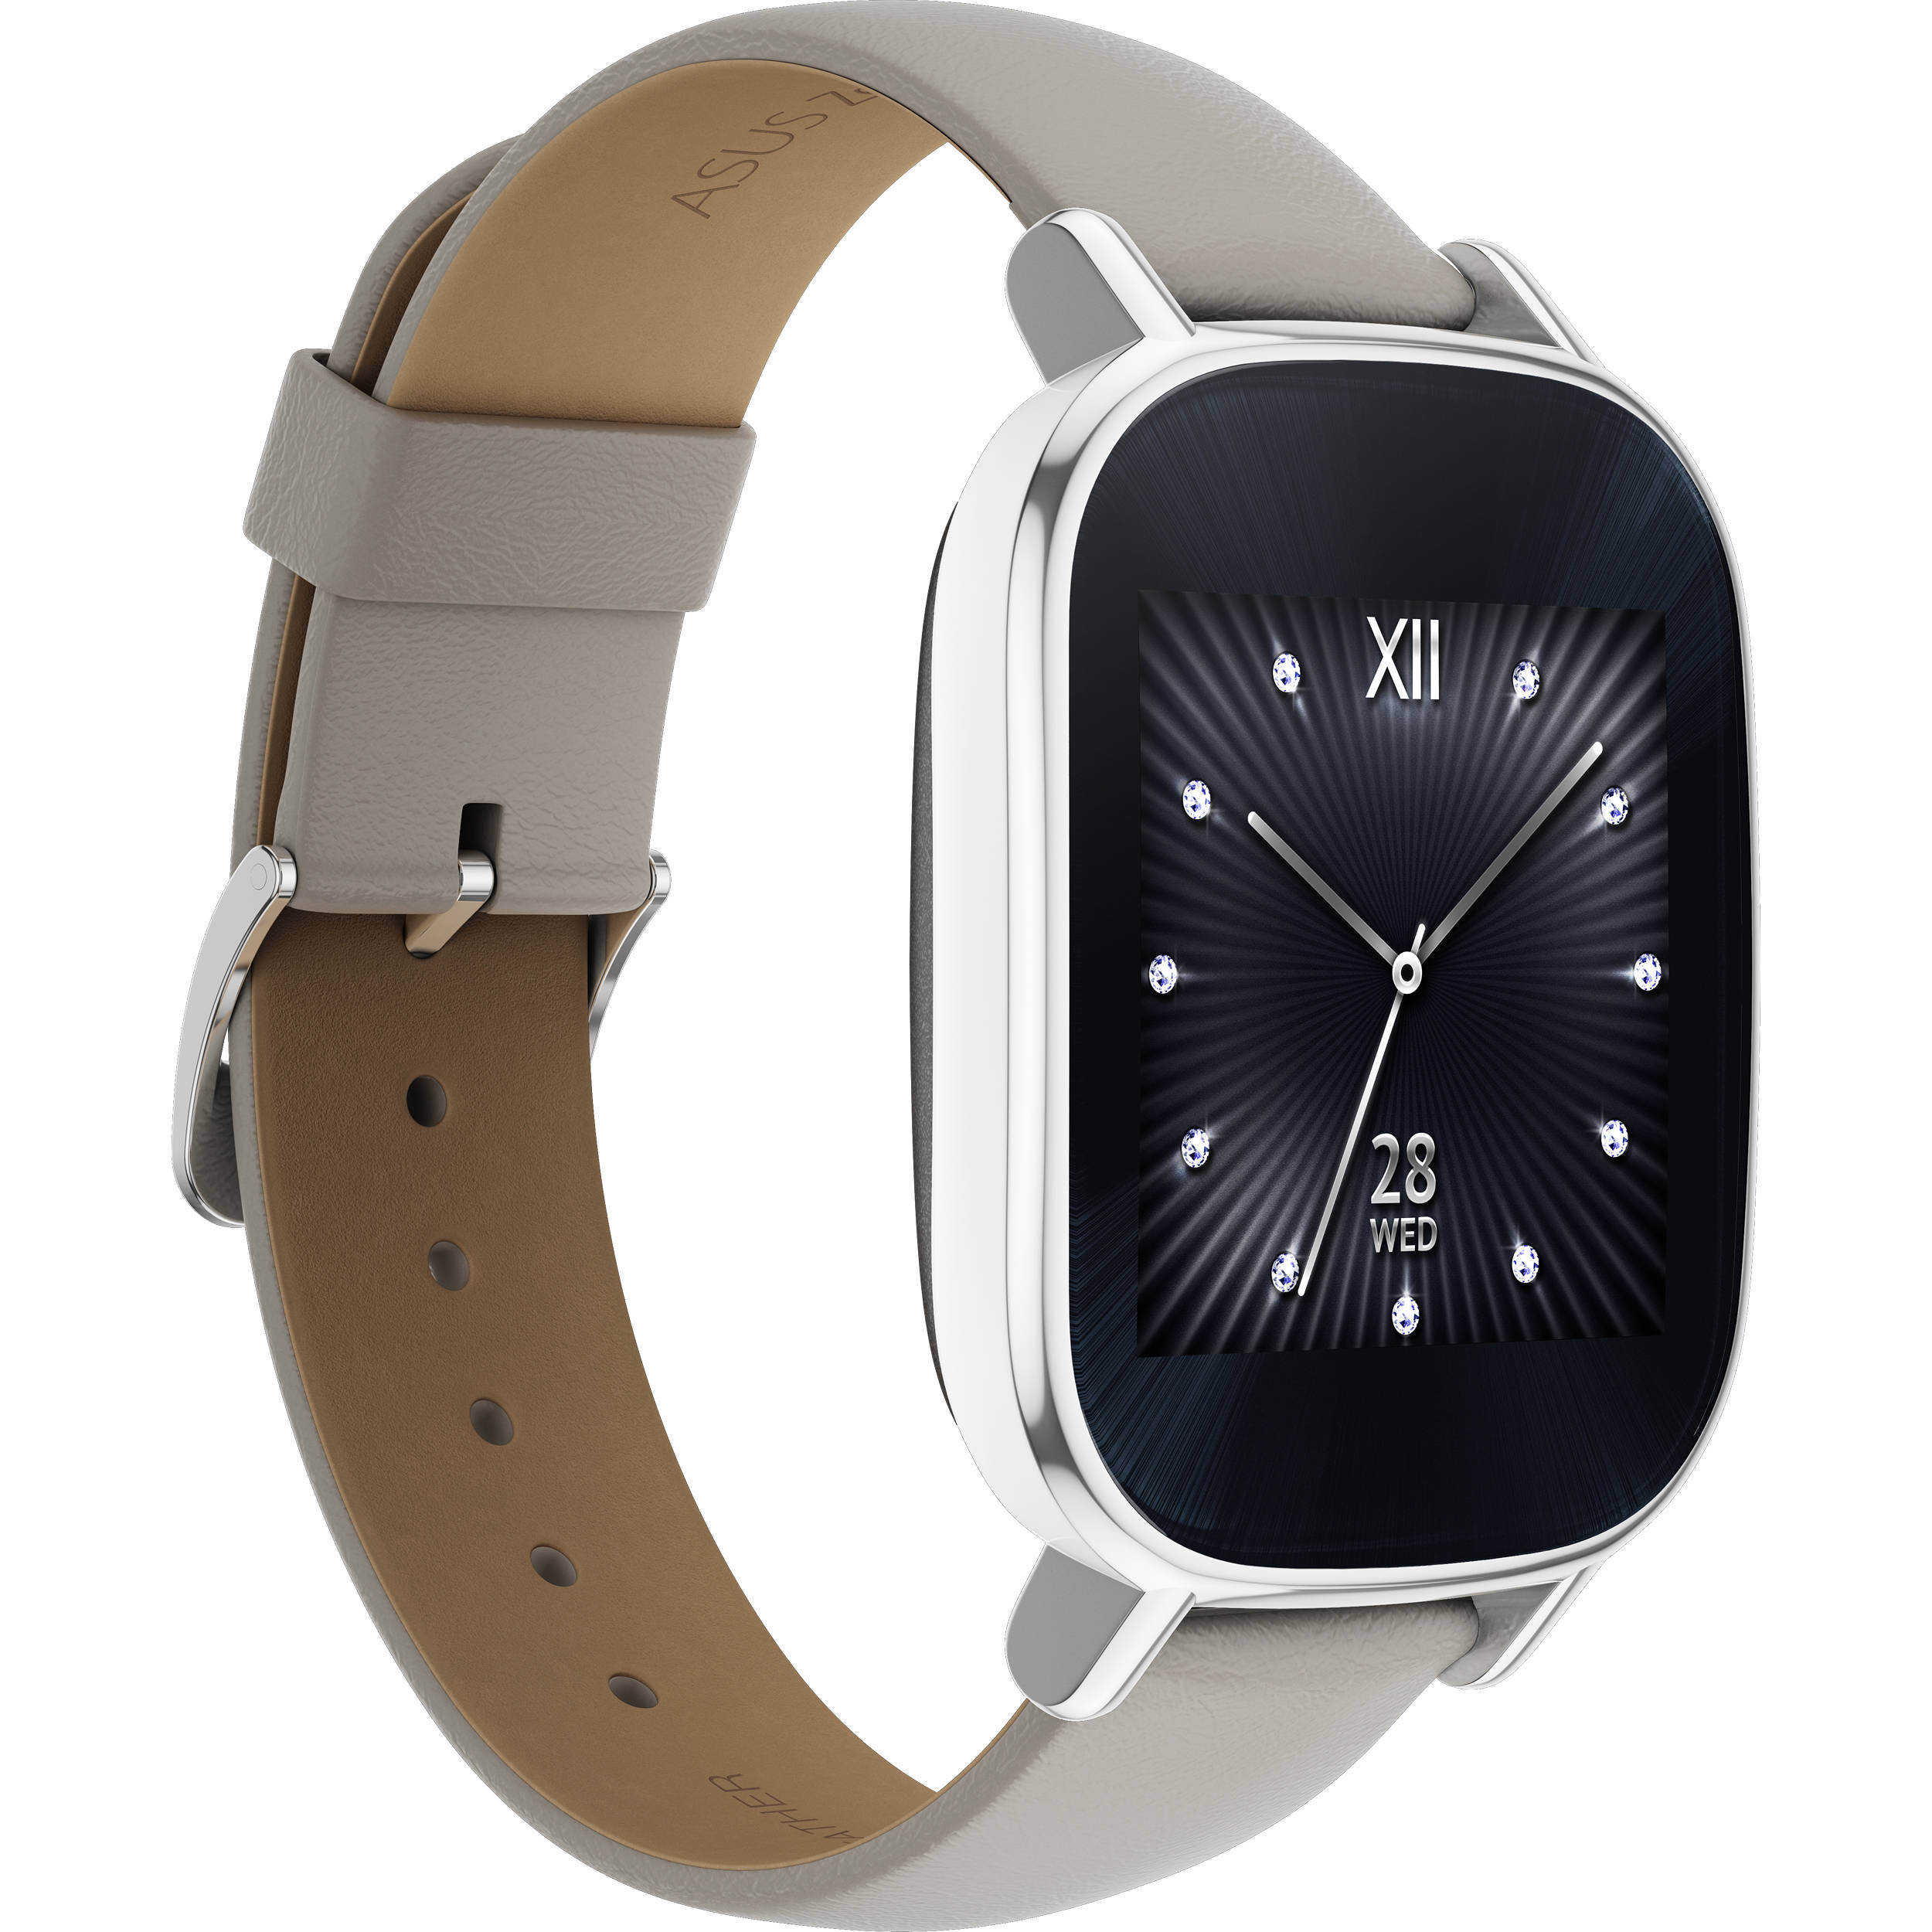 ASUS ZenWatch 2 Android Wear Smartwatch 